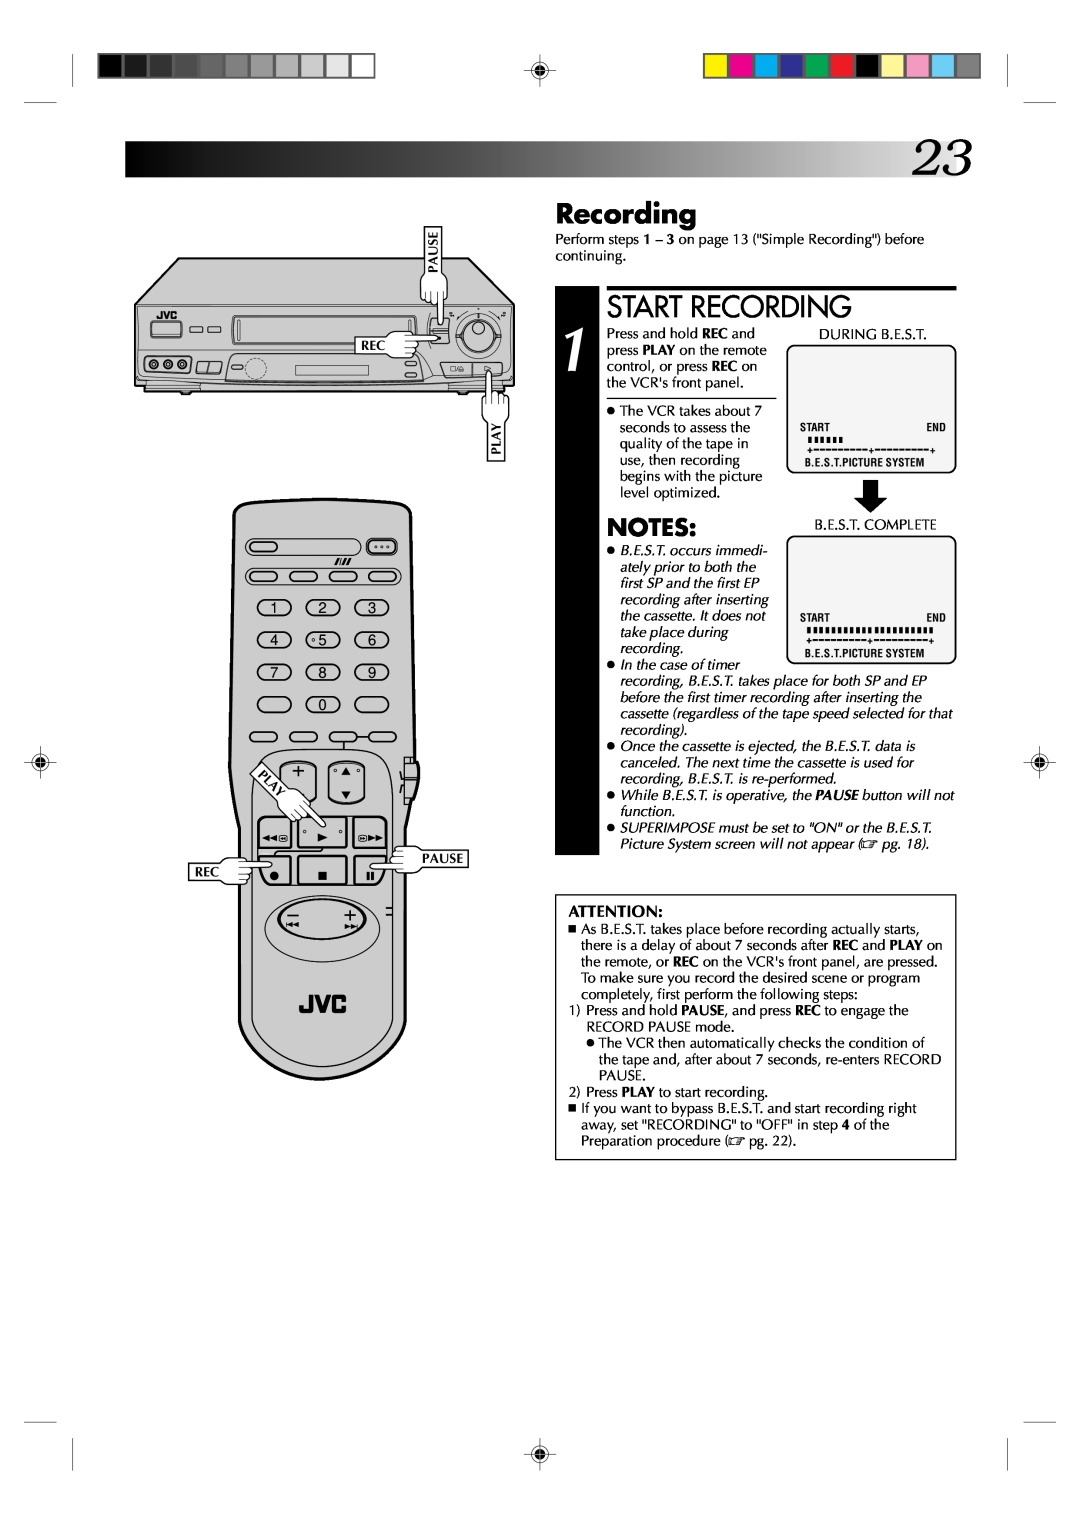 JVC HR-J631T manual Start Recording, the cassette. It does not, take place during, recording 